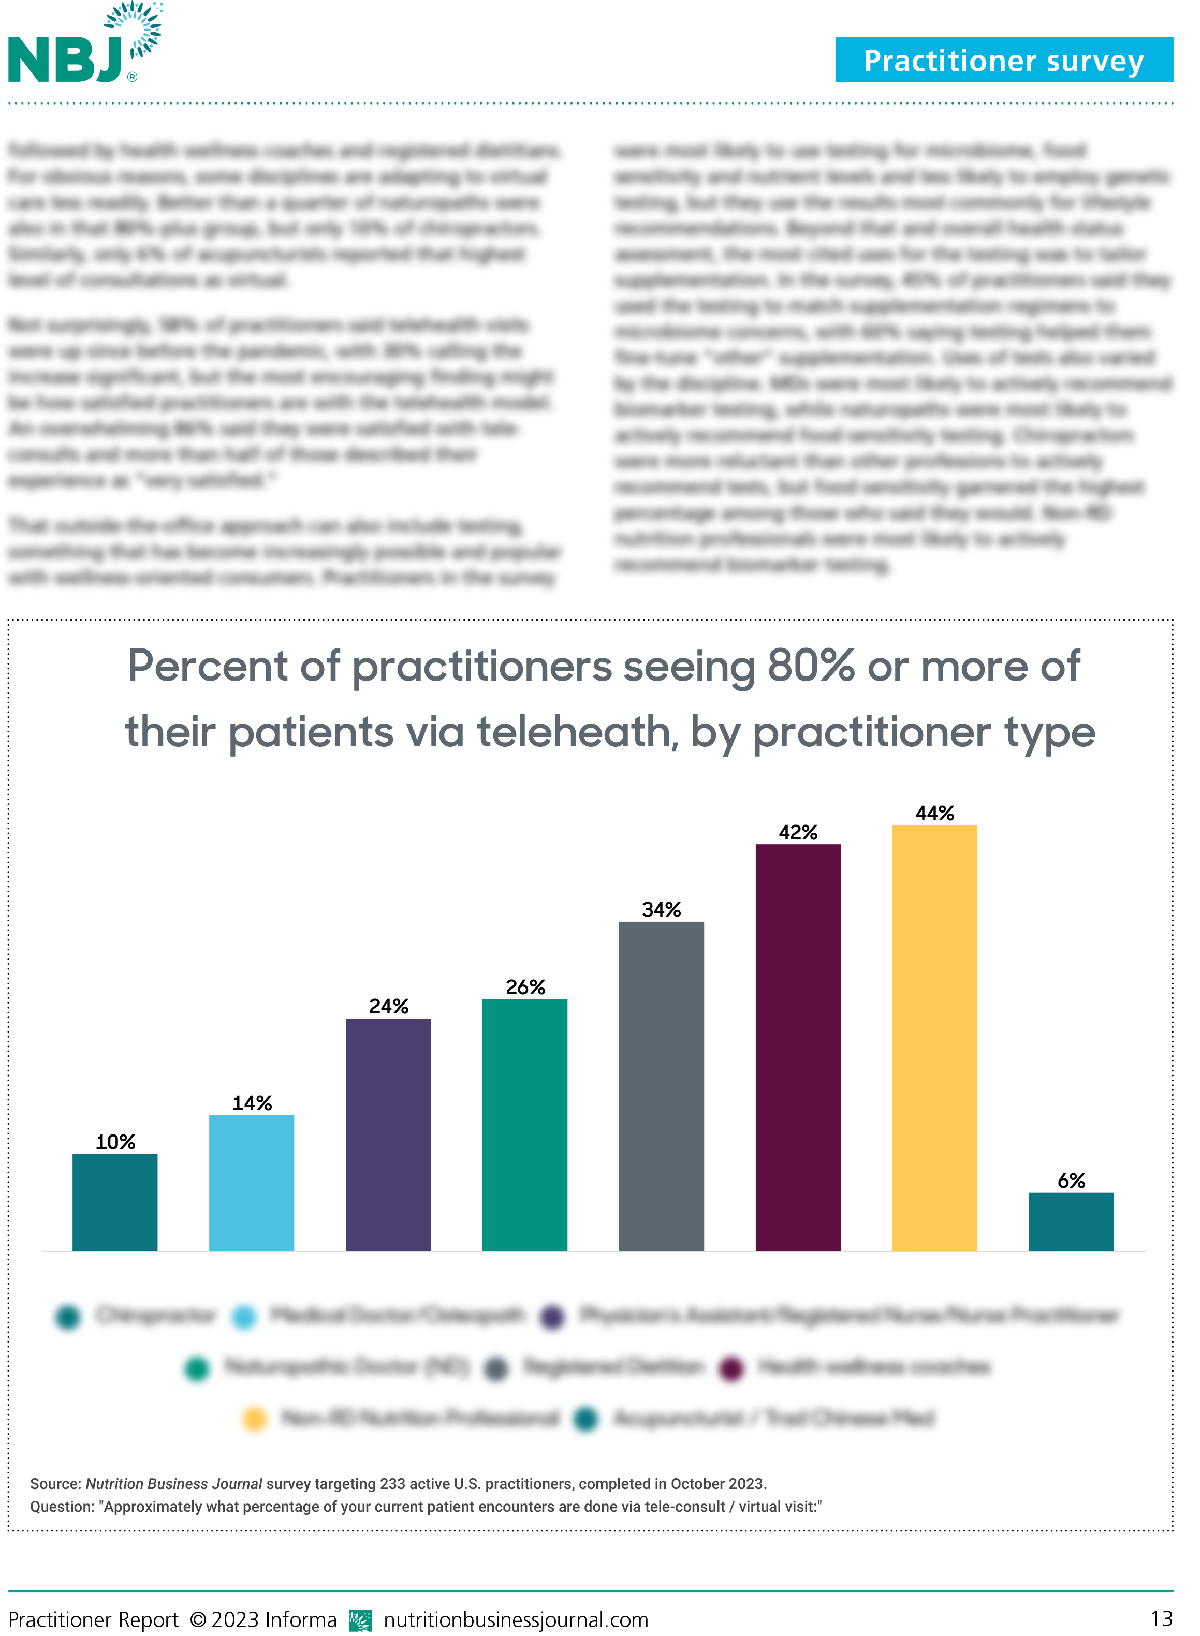 Percent of practitioners seeing 80% or more of their patients via telehealth